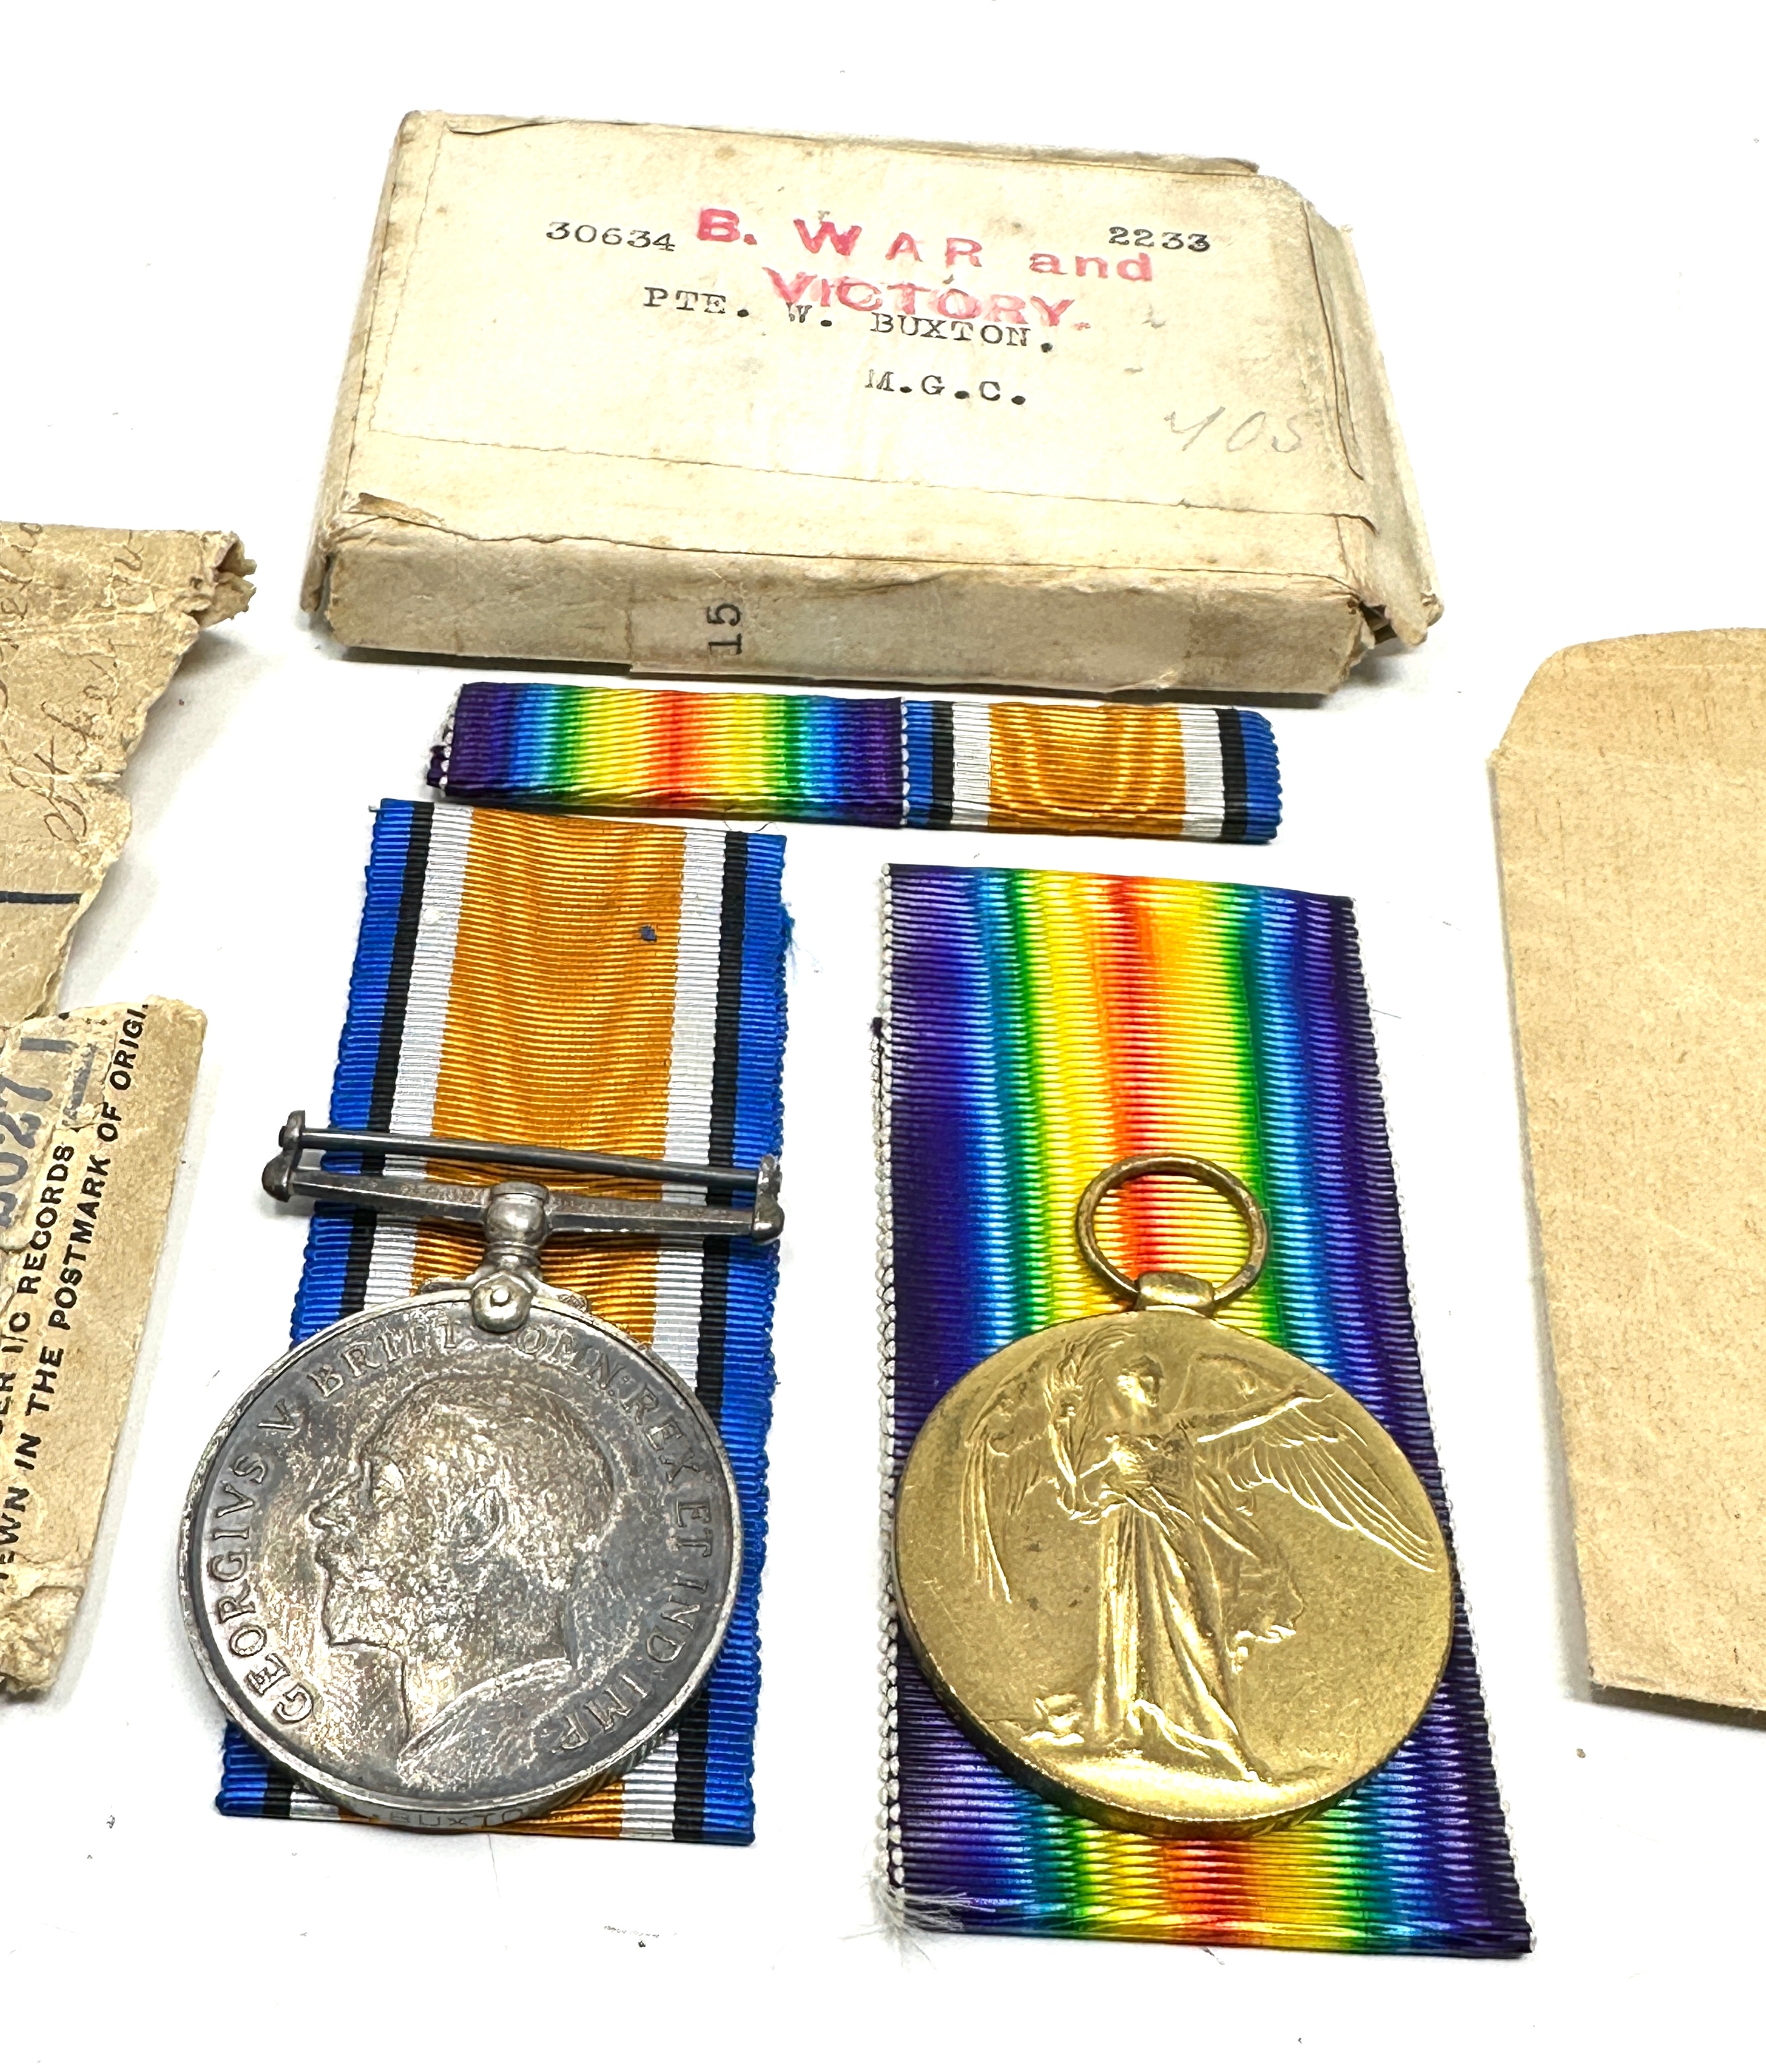 boxed ww1 medal pair to 30634 pte w.buxton M.G.C - Image 2 of 2